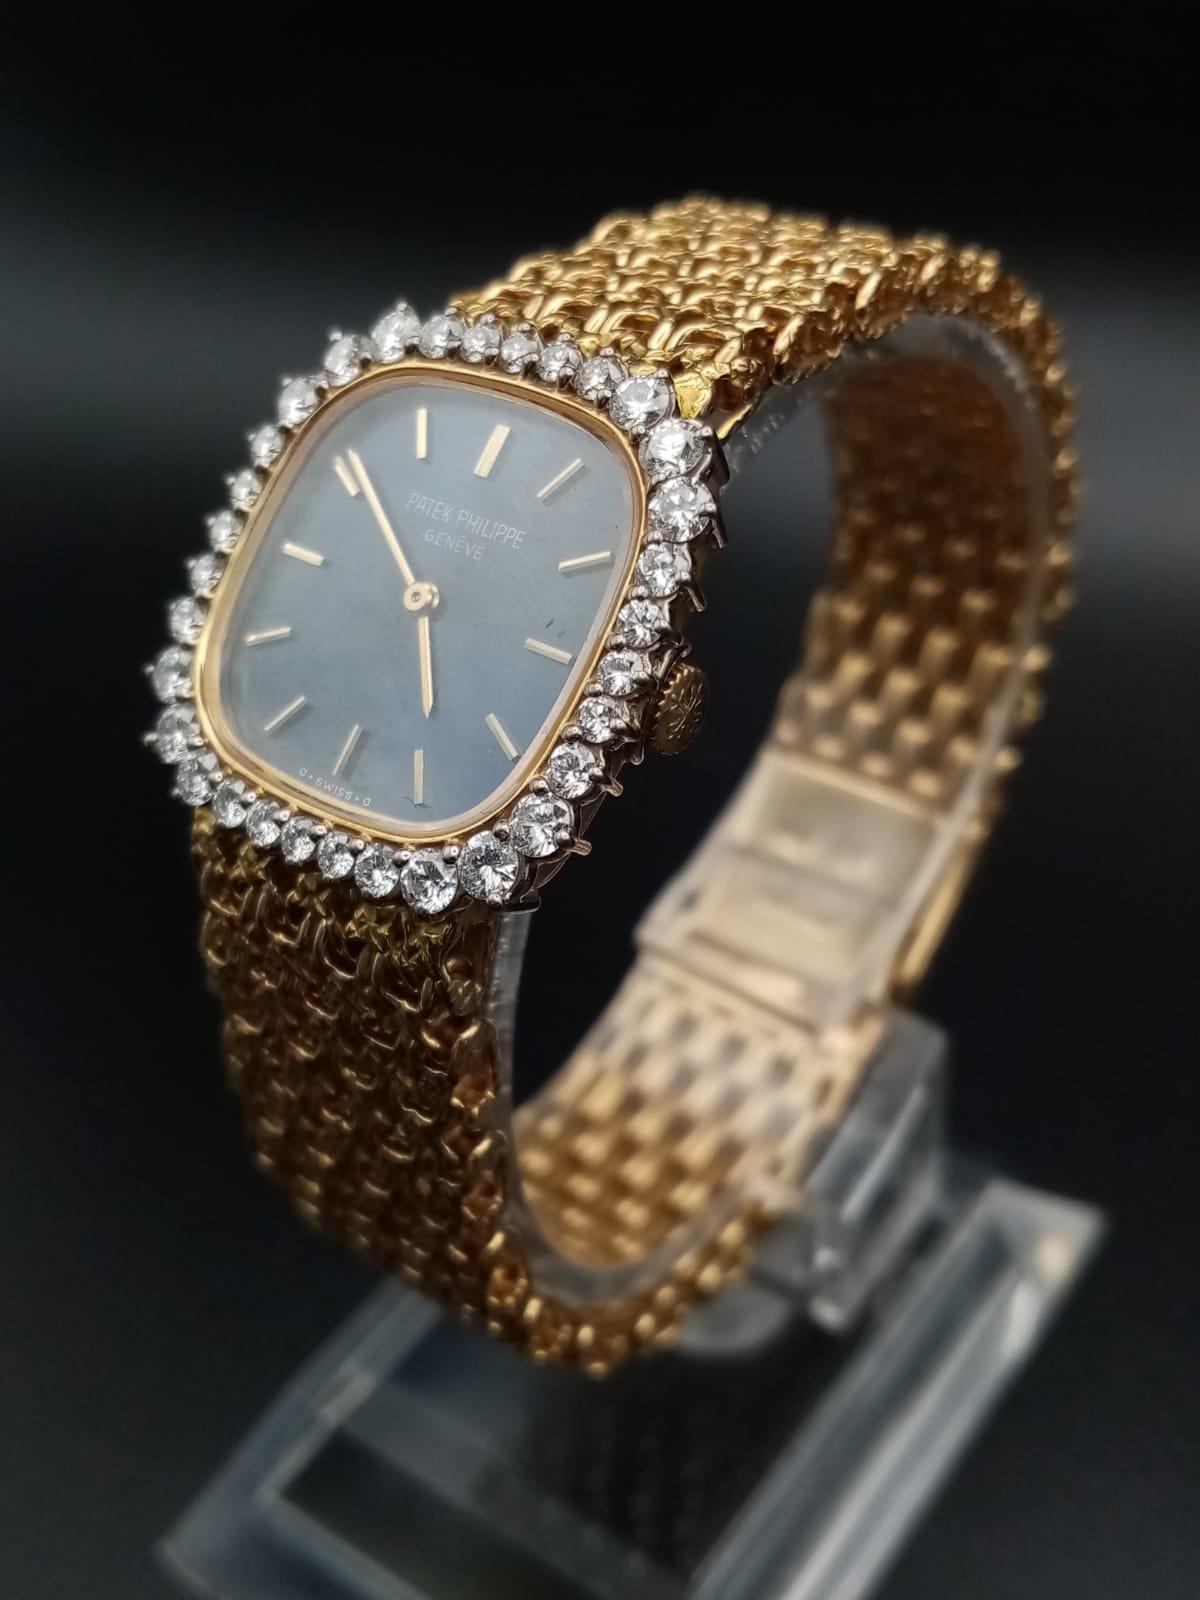 A Patek Phillipe Classic 18K Gold and Diamond Ladies Watch. Woven gold bracelet. Gold case - 24mm. - Image 2 of 11